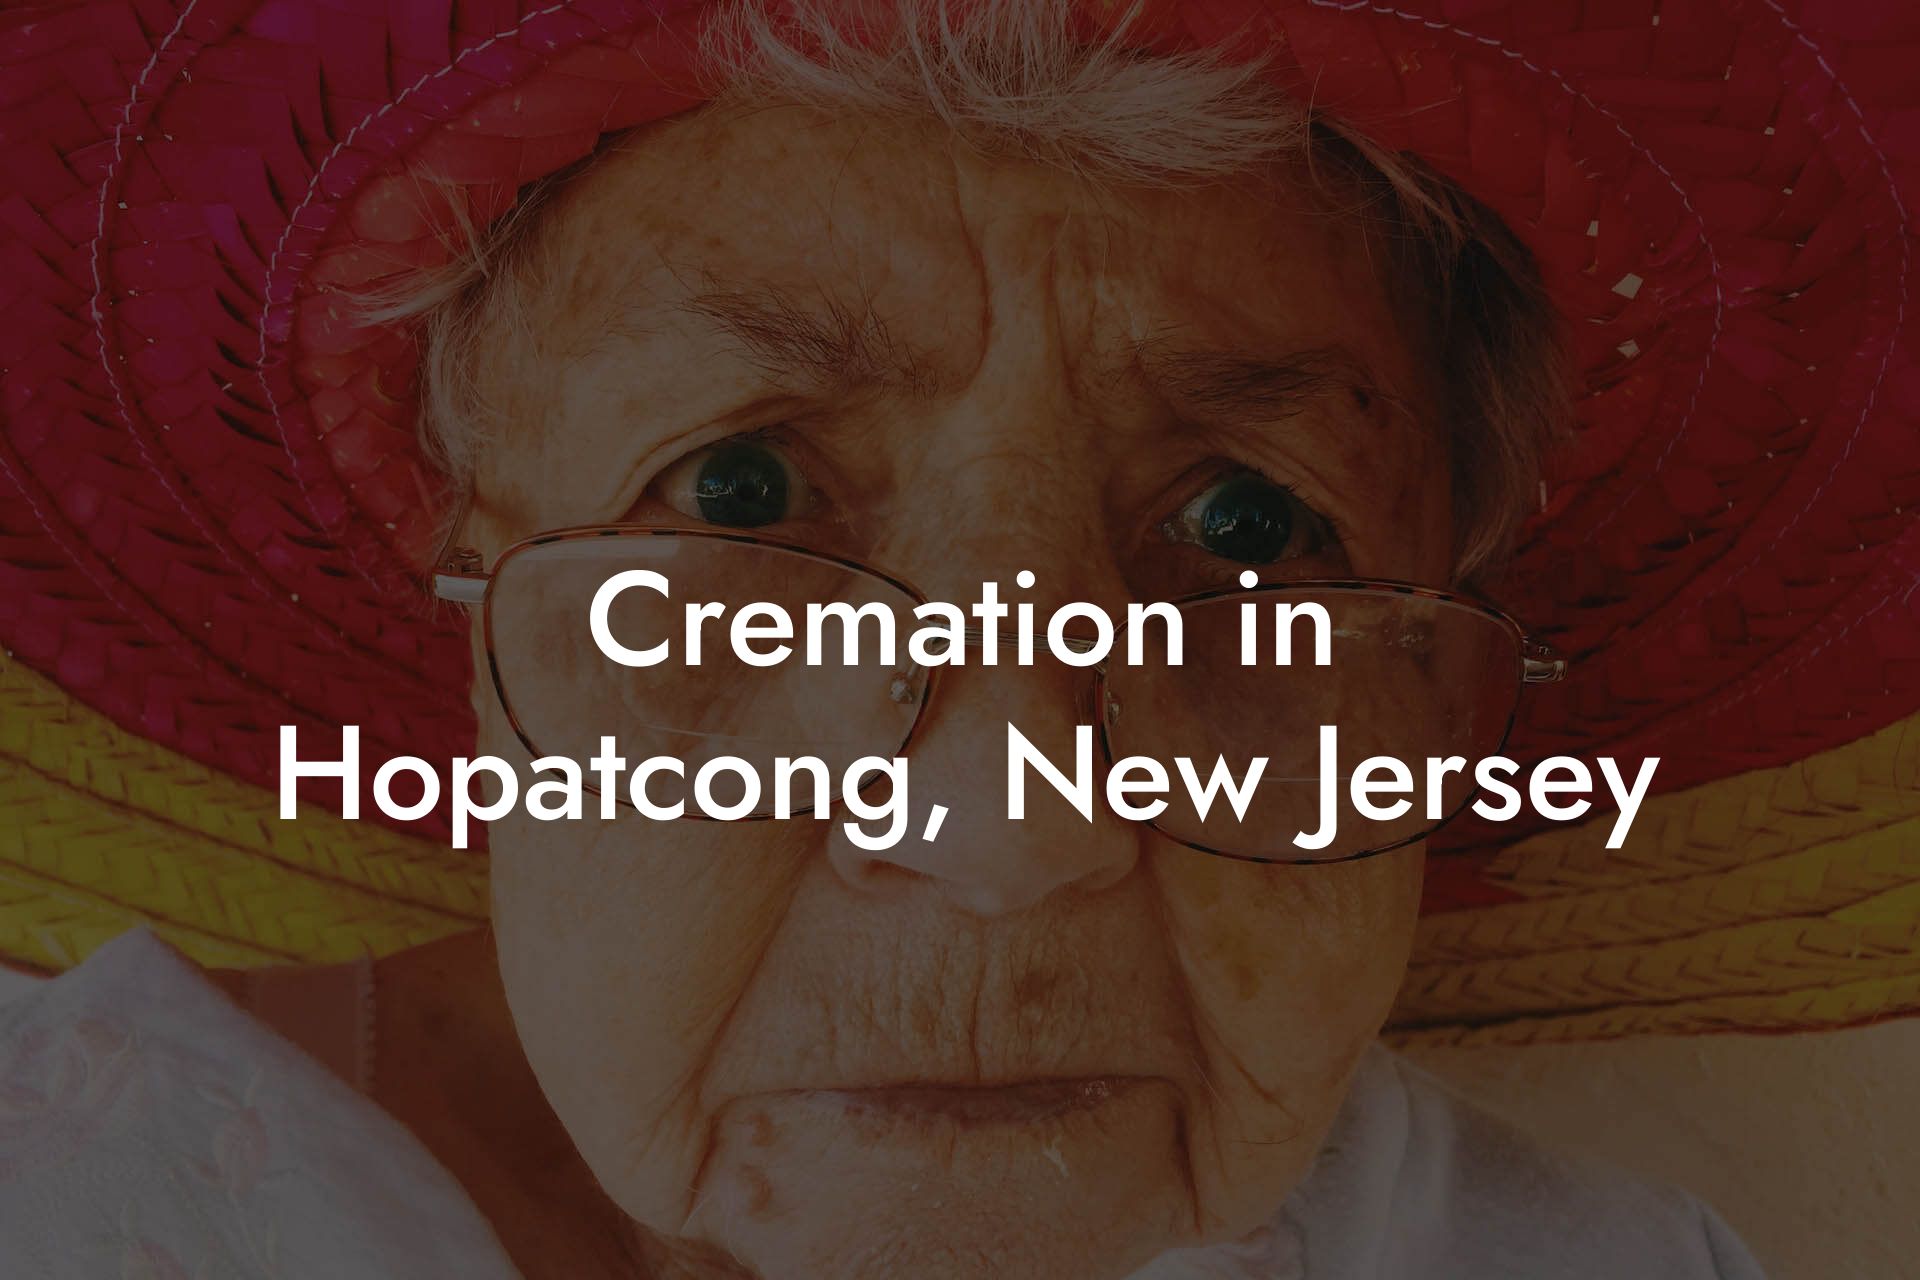 Cremation in Hopatcong, New Jersey